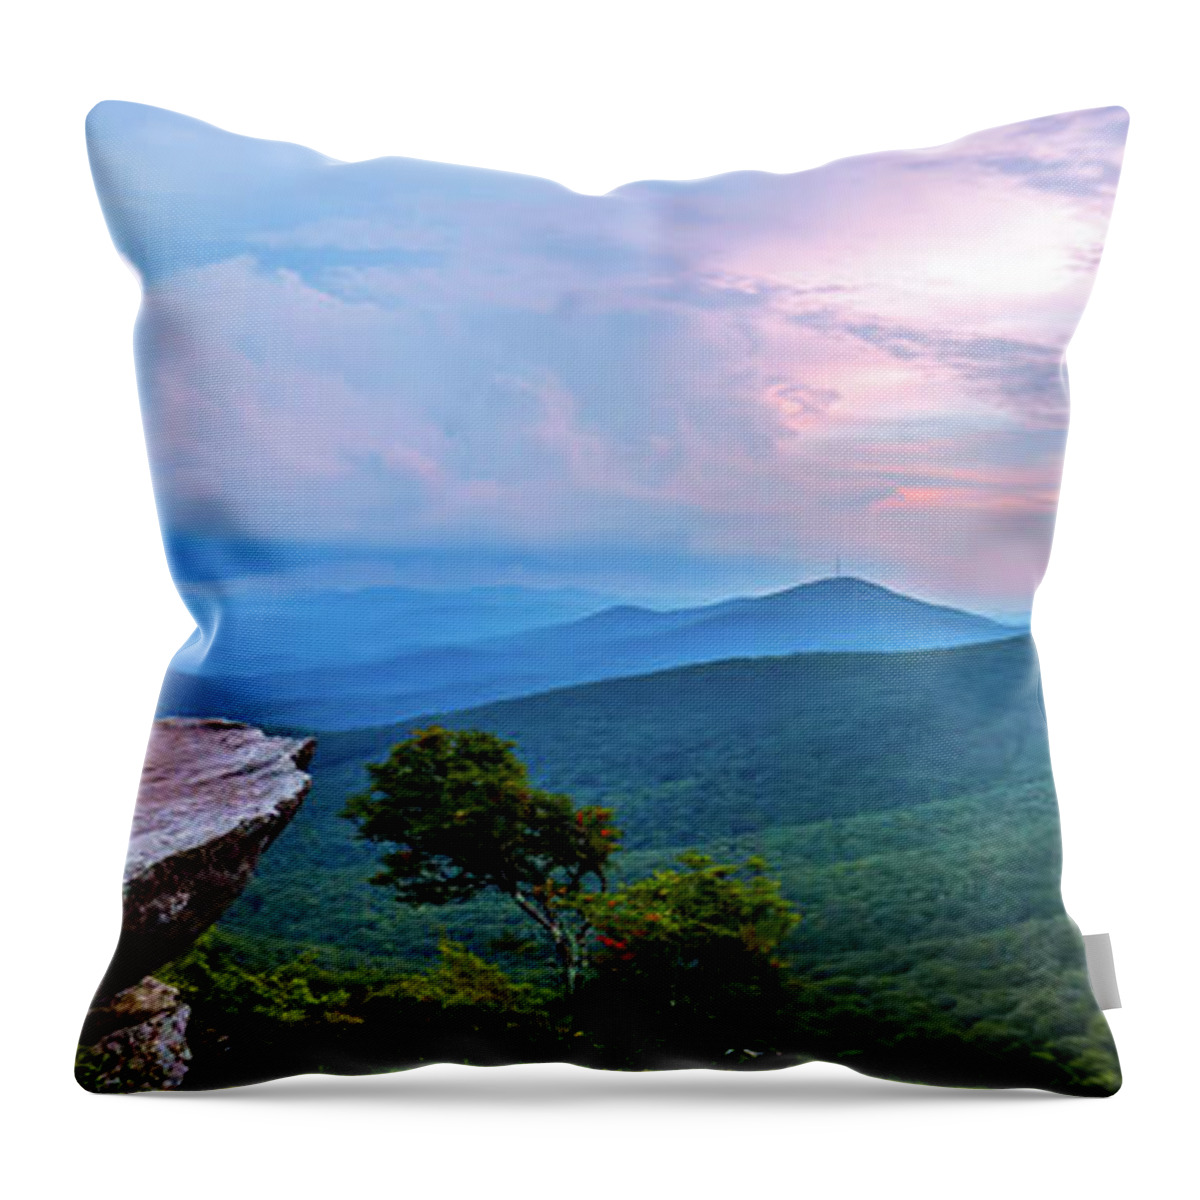 Light Throw Pillow featuring the photograph Rough Ridge Overlook Viewing Area Off Blue Ridge Parkway Scenery #8 by Alex Grichenko